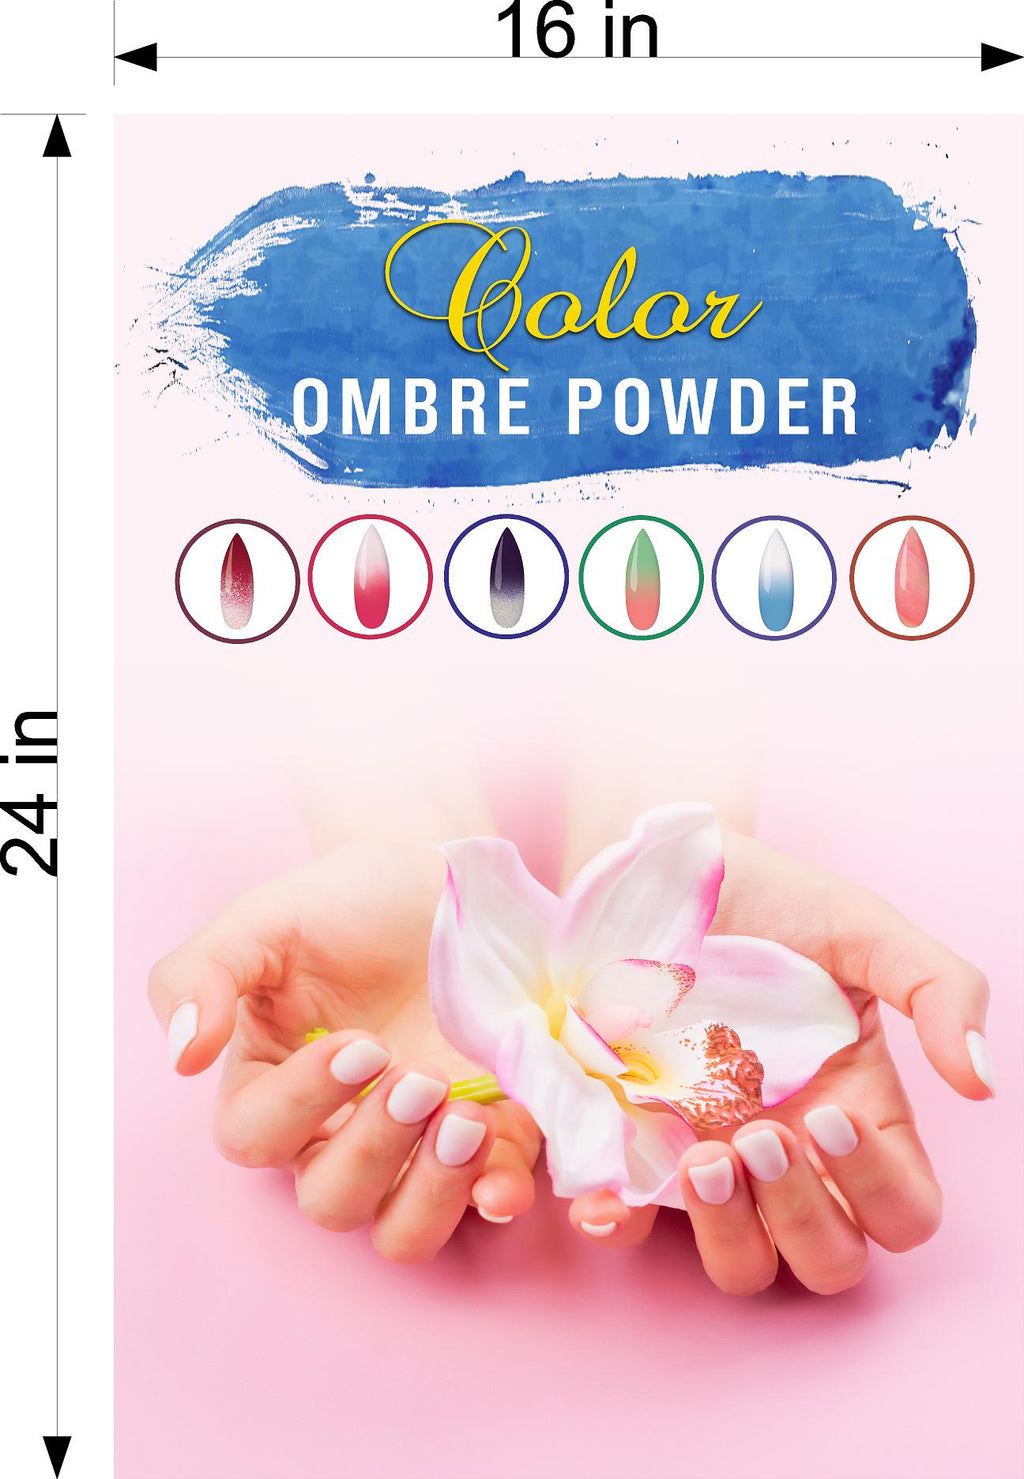 Ombre Nails 01 Photo-Realistic Paper Poster Premium Salon Interior Inside Sign Advertising Marketing Wall Window Non-Laminated Vertical